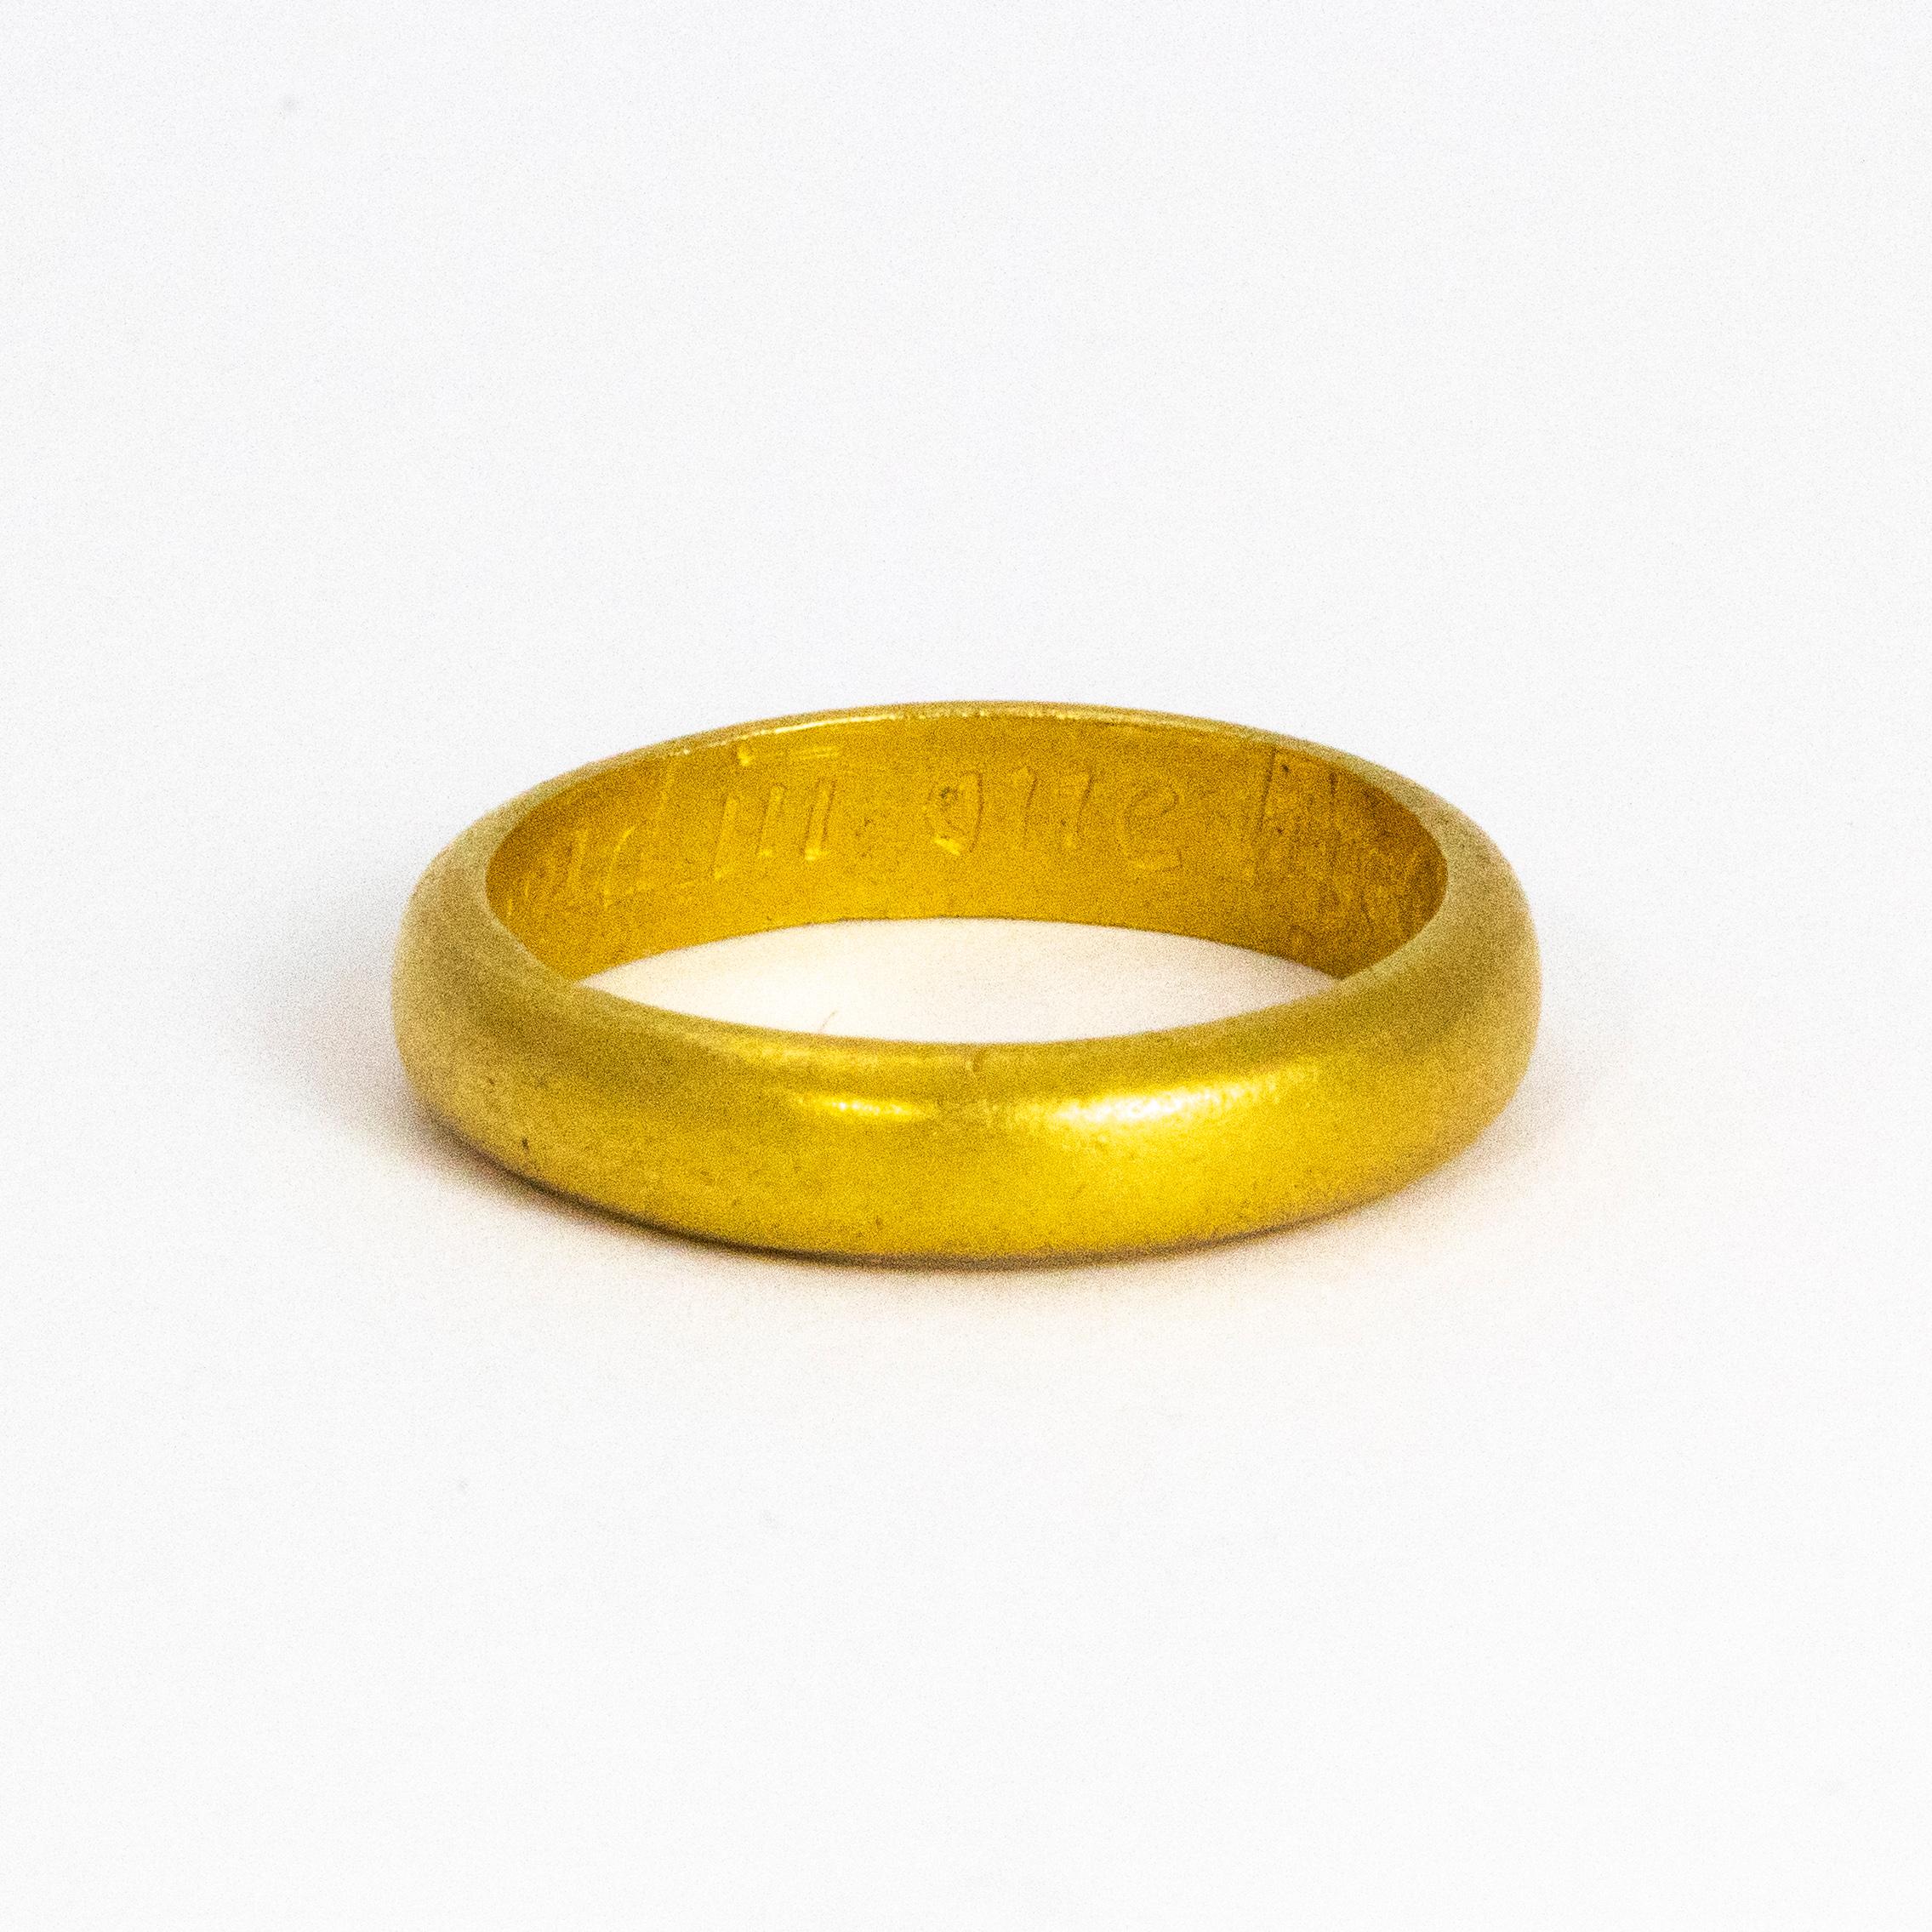 A rare antique posy ring crafted around 1680-1720. The inside of the band is engraved with the inscription 'OYND IN ONE BY CHRIST ALONE'. Modelled in 18 karat yellow gold.

Ring Size: K or 5.5